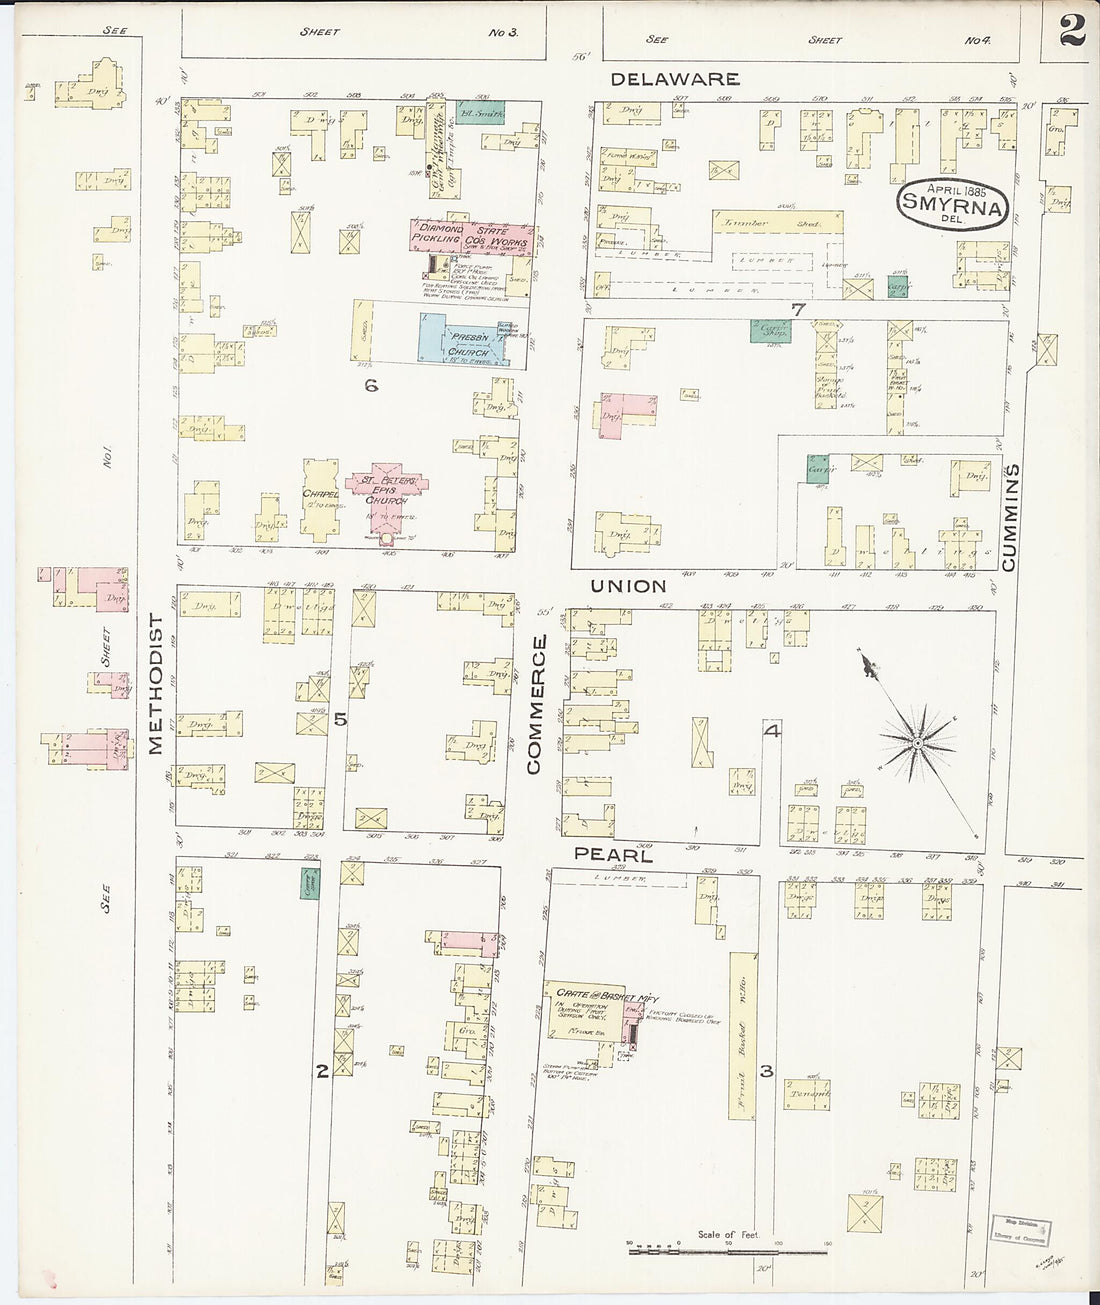 This old map of Smyrna, Kent County, Delaware was created by Sanborn Map Company in 1885